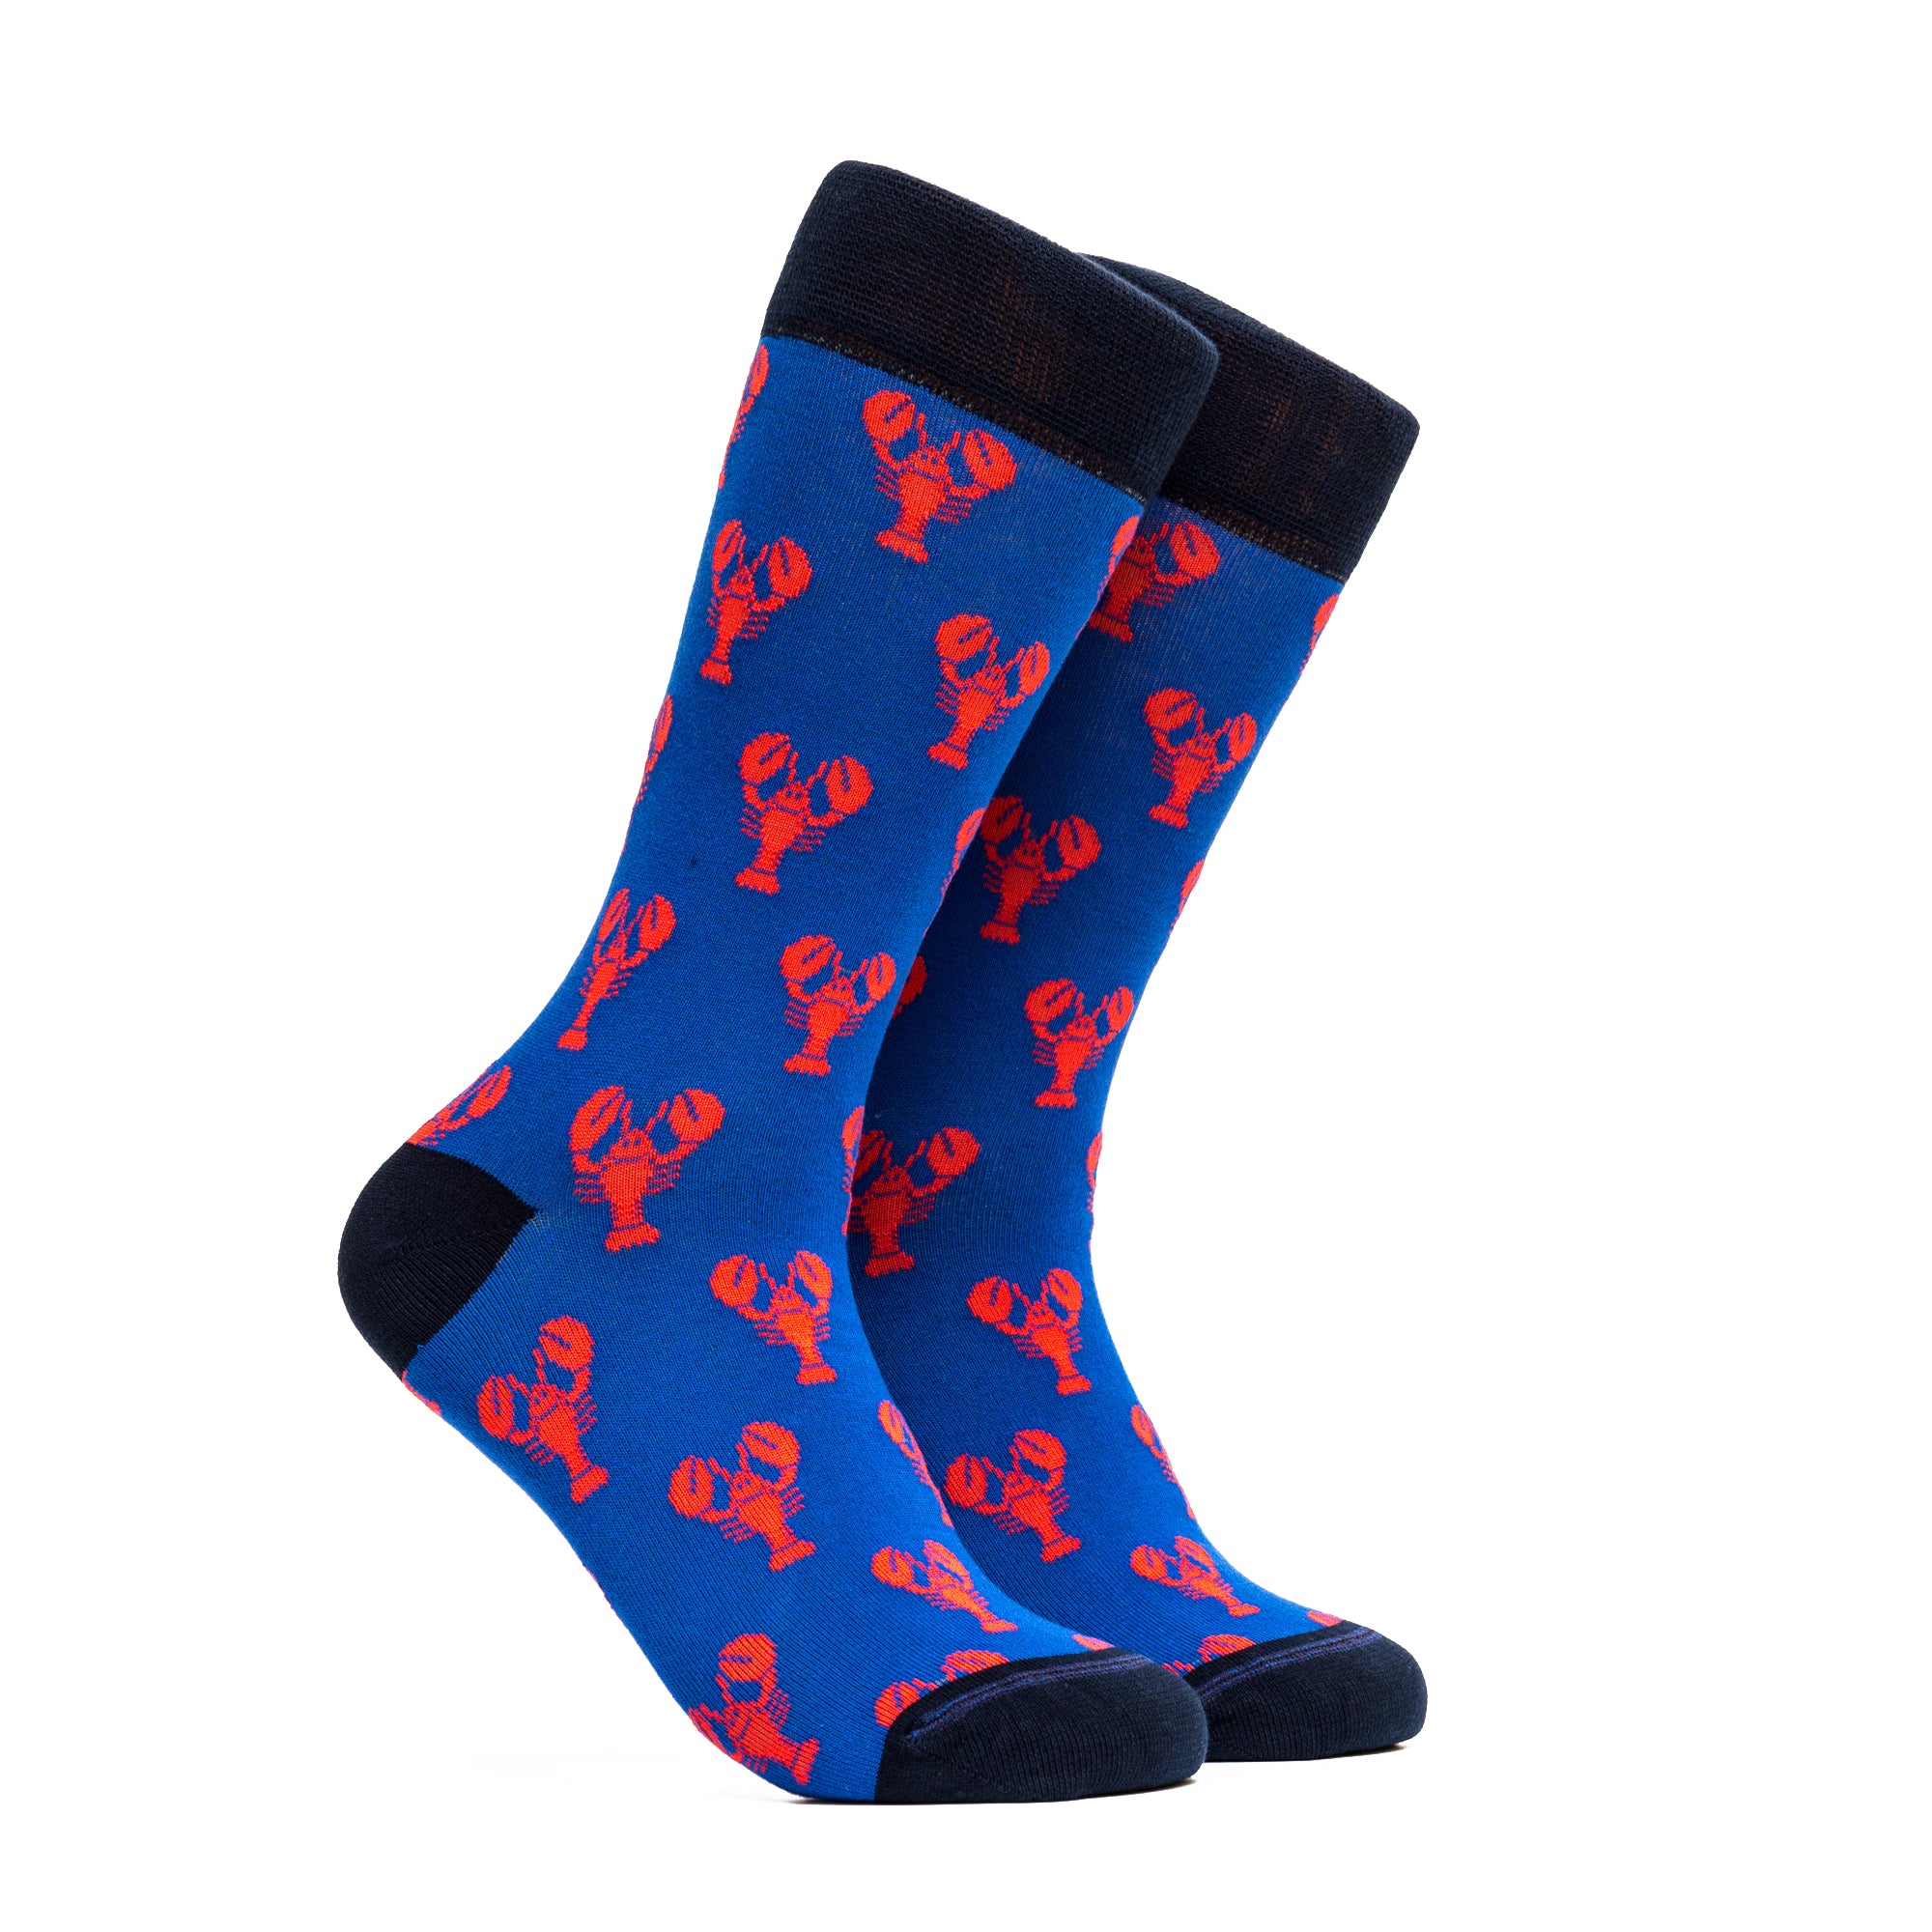 Sea Creatures 2 Combo - Colors Red and Blue - 5 pairs